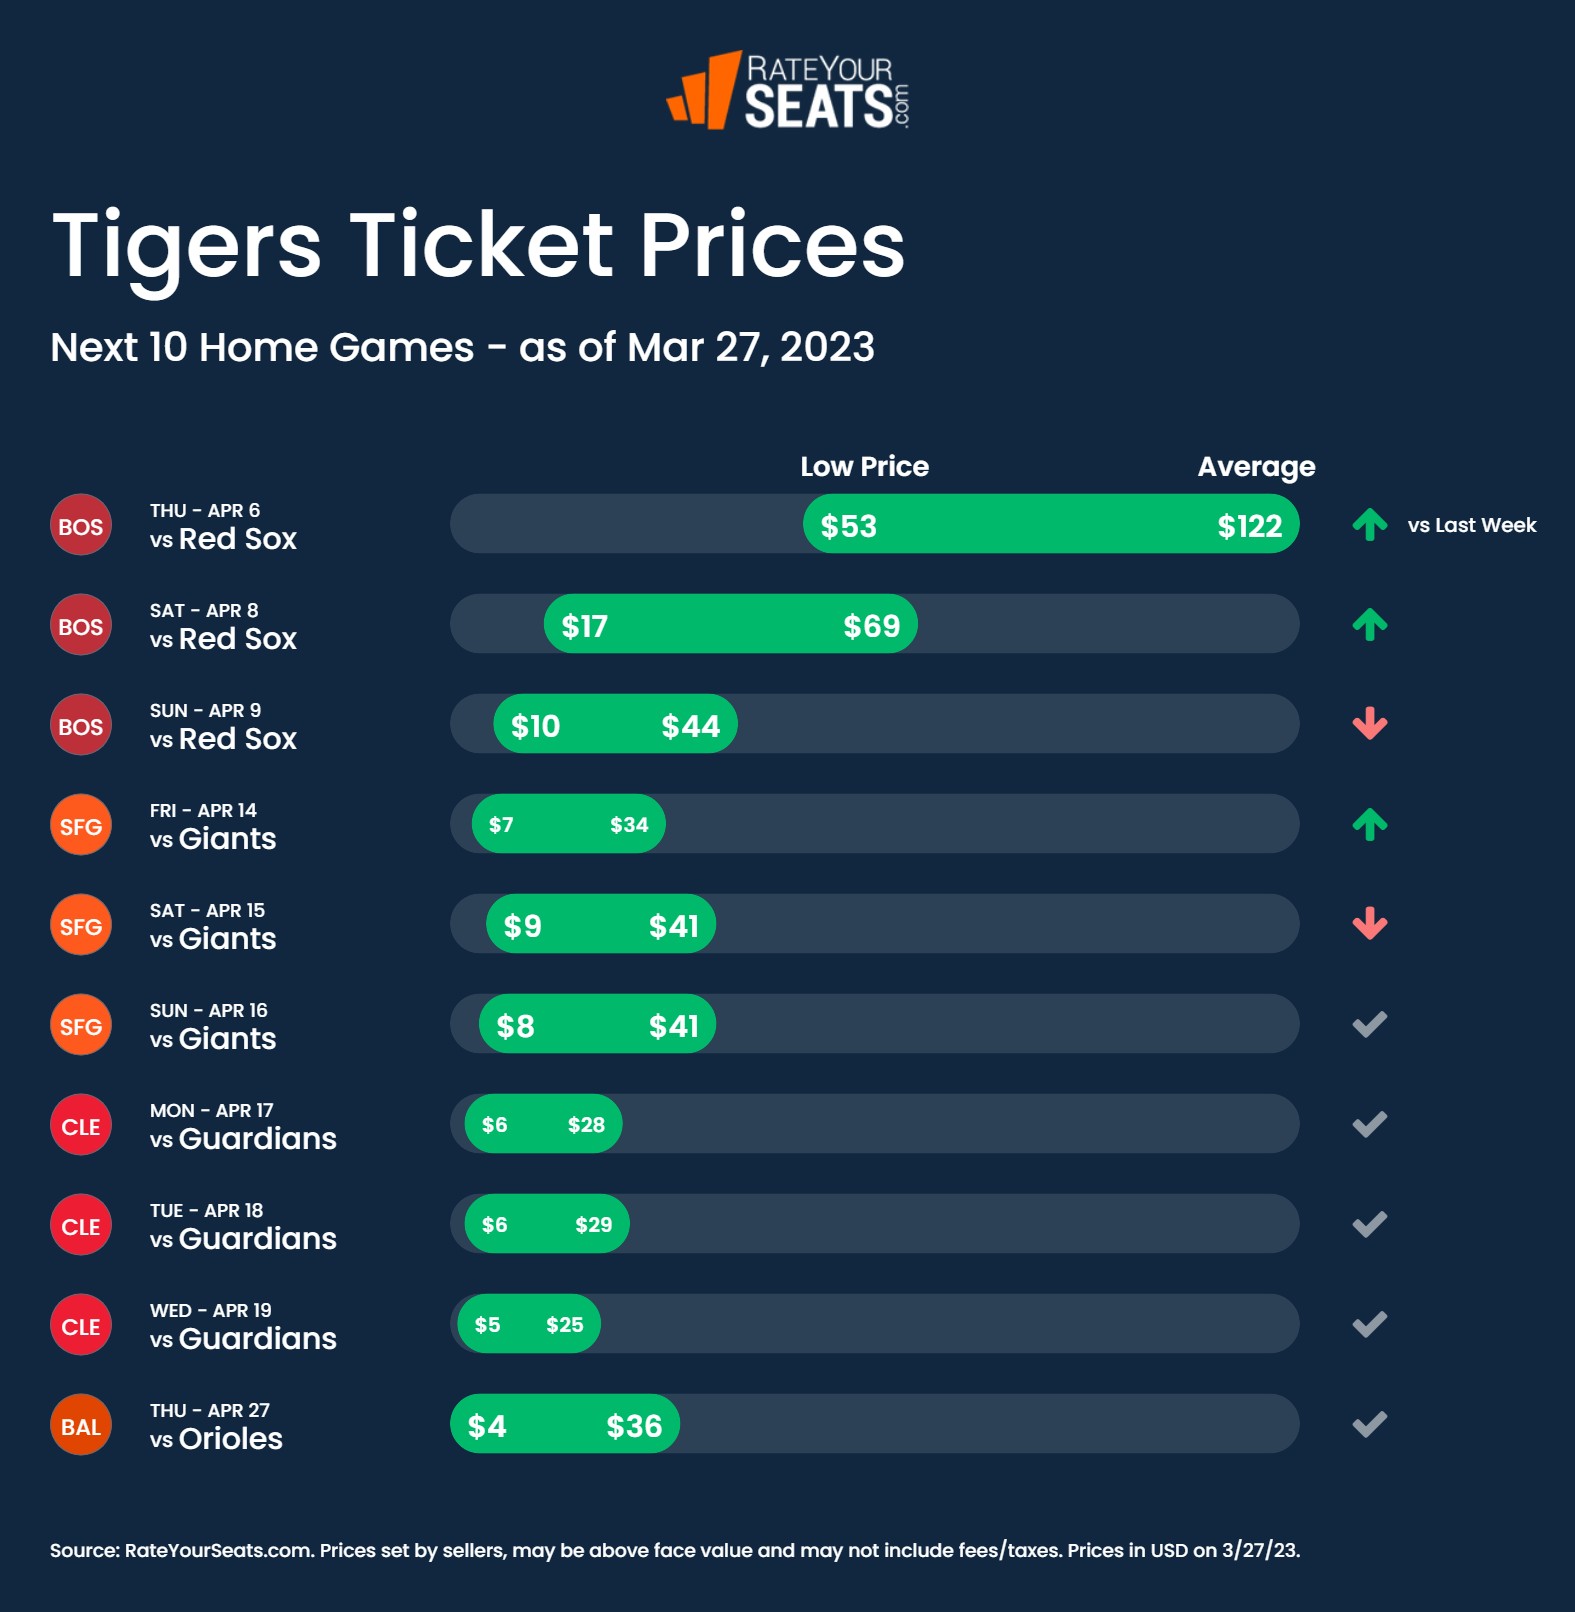 Tigers tickets pricing week of March 27 2023